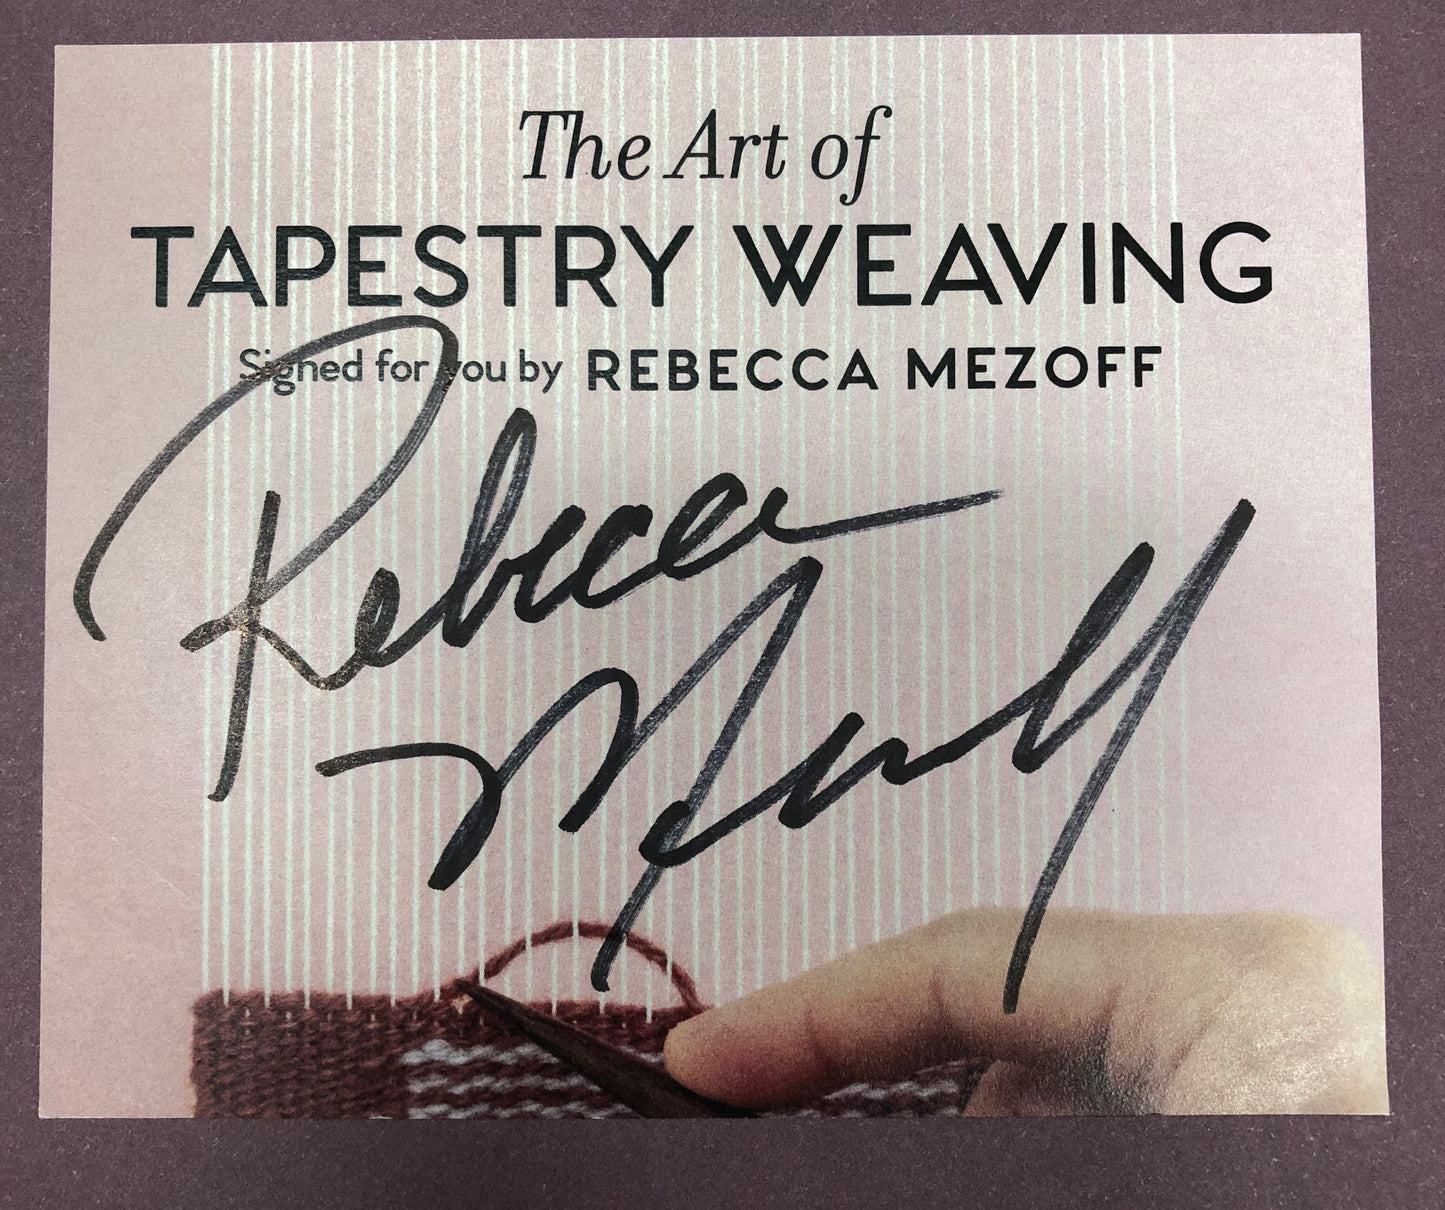 "The Art of Tapestry Weaving : A Complete Guide to Mastering the Techniques for Making Images with Yarn" by Rebecca Mezoff